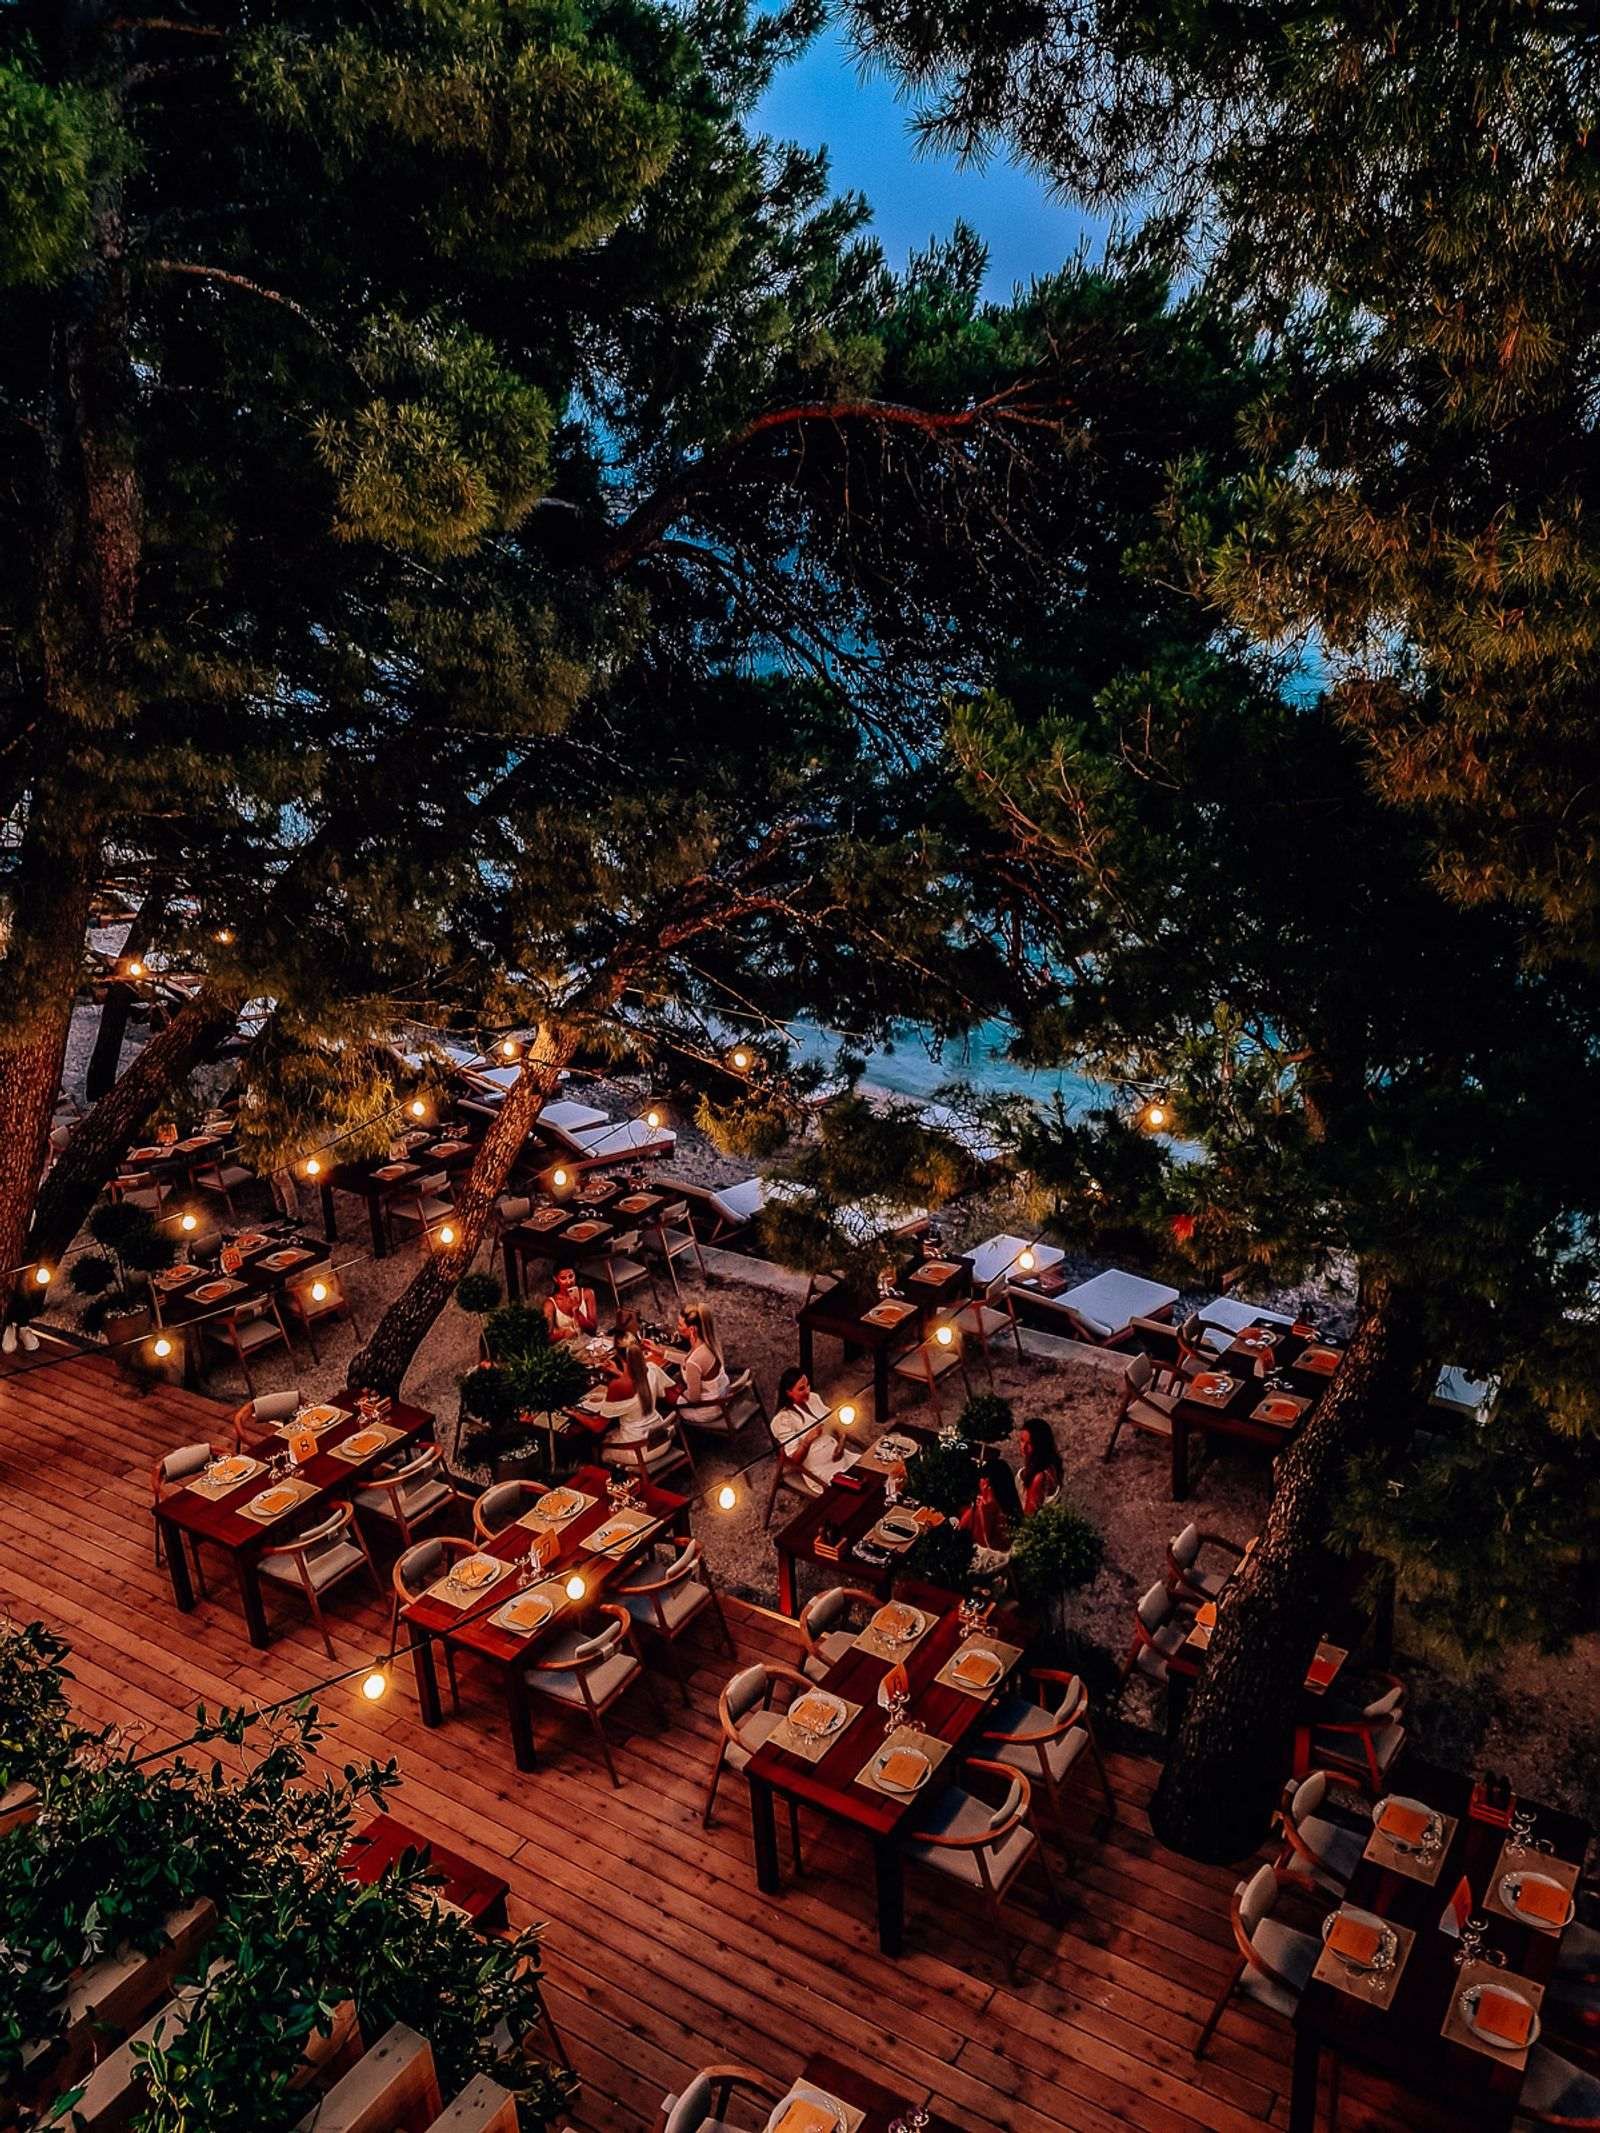 looking down on a dining area set up on the beach next to the sea below the trees with fairy lights strung around